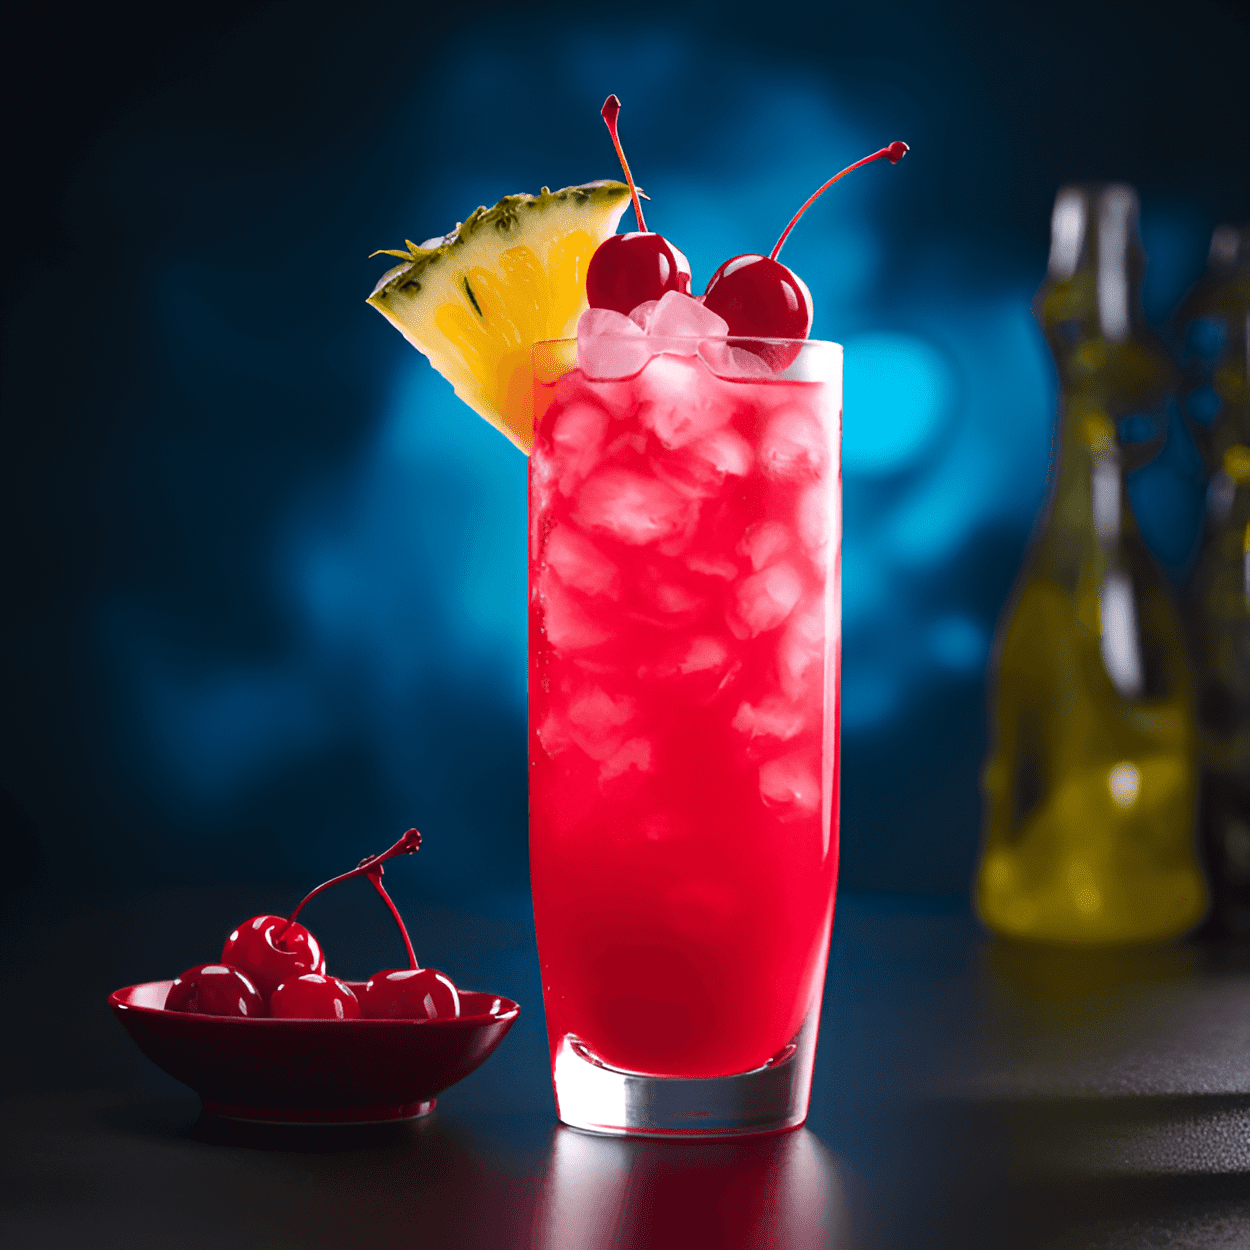 Shark's Tooth Cocktail Recipe - The Shark's Tooth cocktail has a sweet and sour taste with a strong rum flavor. The lime juice adds a tangy citrus note, while the grenadine provides a hint of sweetness. The pineapple juice gives it a tropical, fruity flavor that's refreshing and delicious.